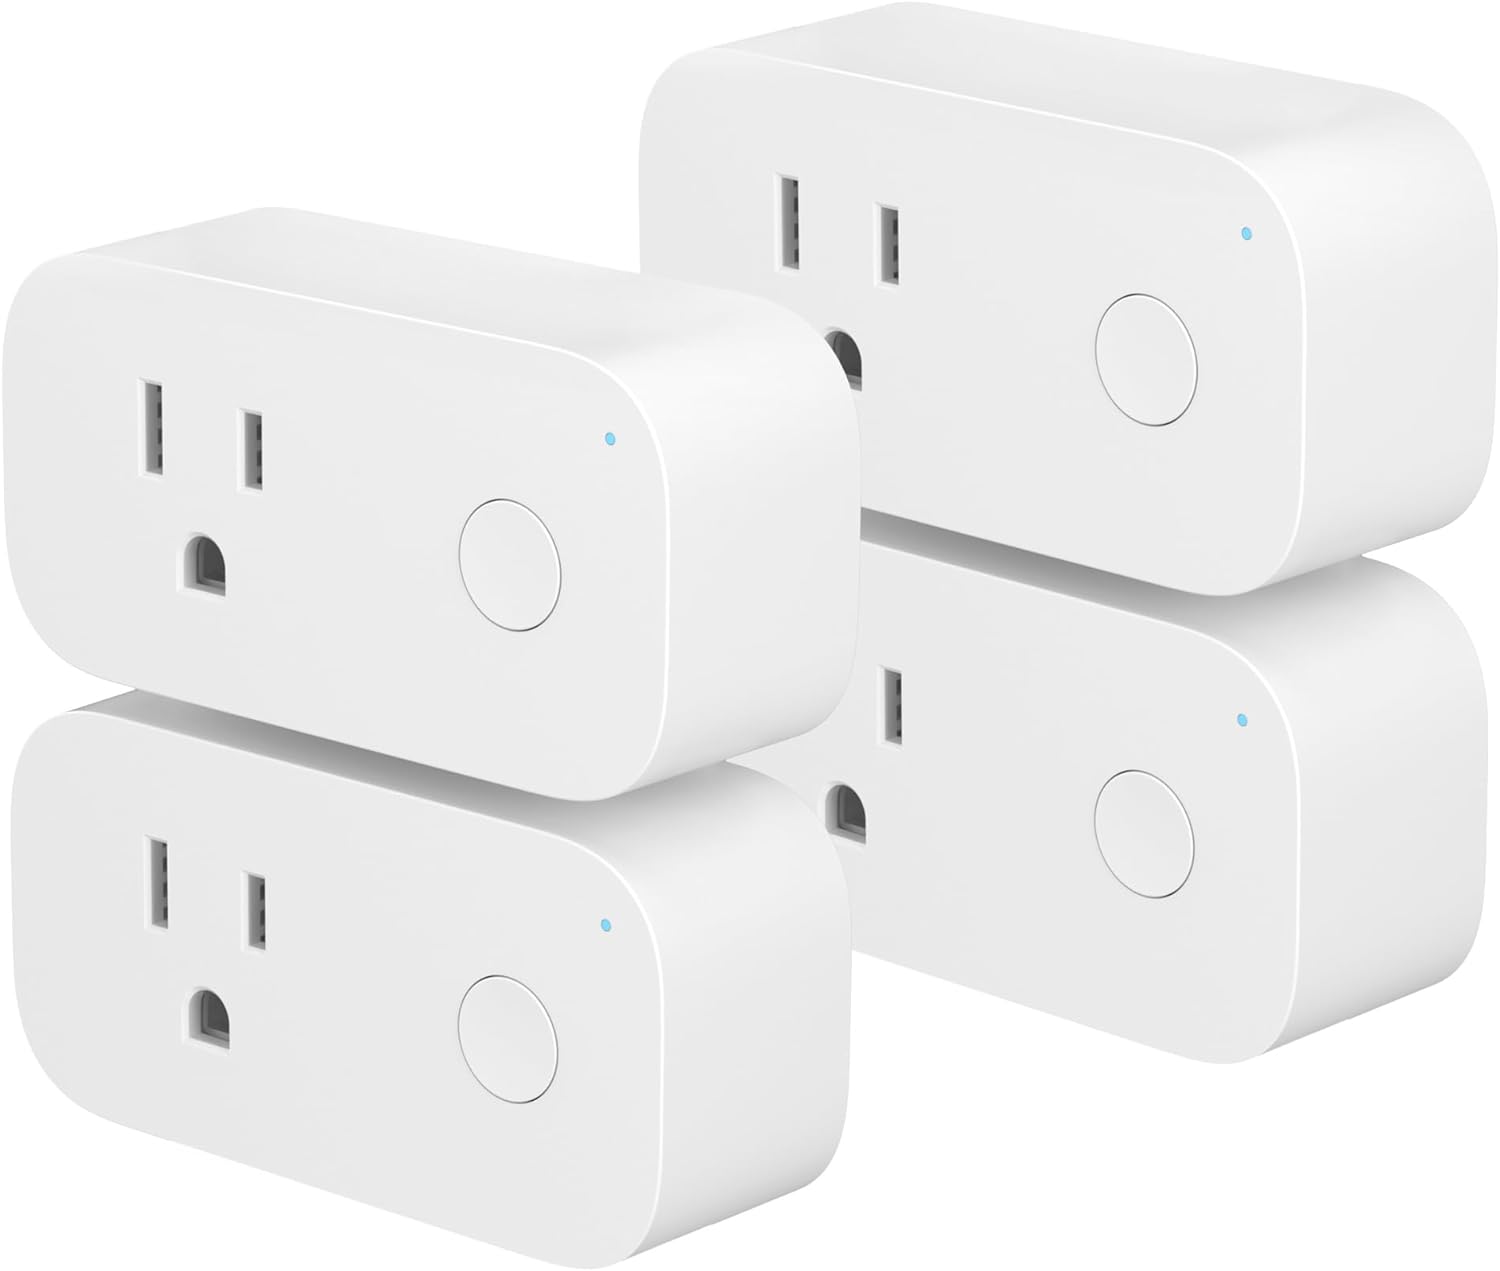 BN-LINK WiFi Heavy Duty Smart Plug Outlet, No Hub Required with Timer Function, White, Compatible with Alexa and Google Assistant, 2.4 Ghz Network Only (2 Pack)